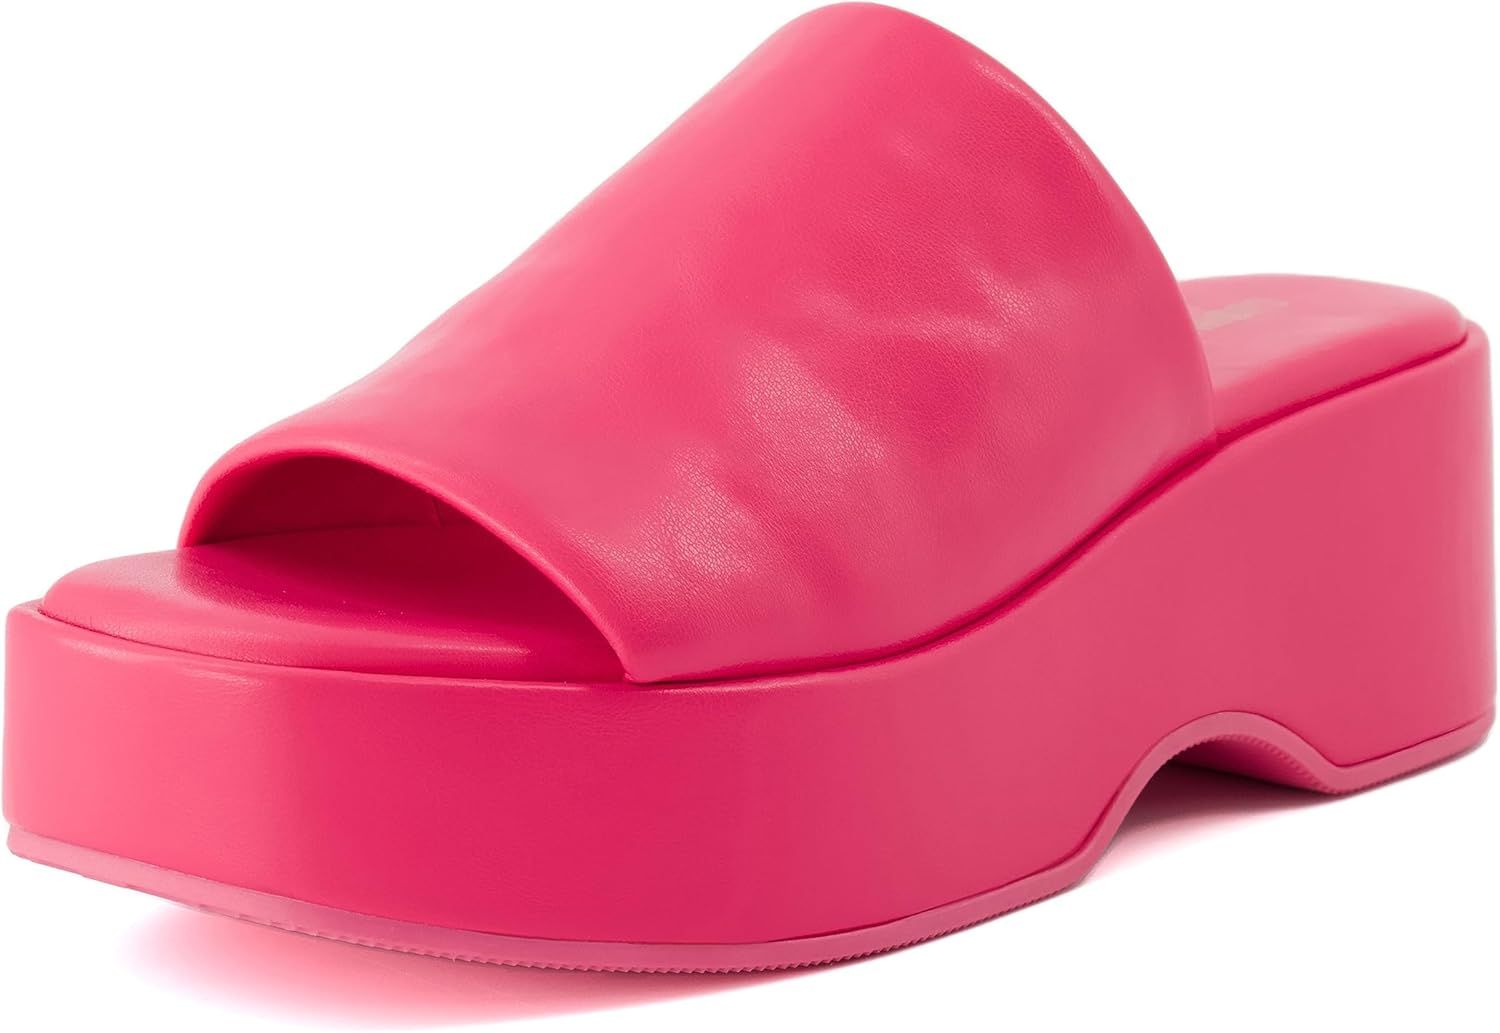 CUSHIONAIRE Women's Spin one band platform sandal with +Memory Foam | Amazon (US)